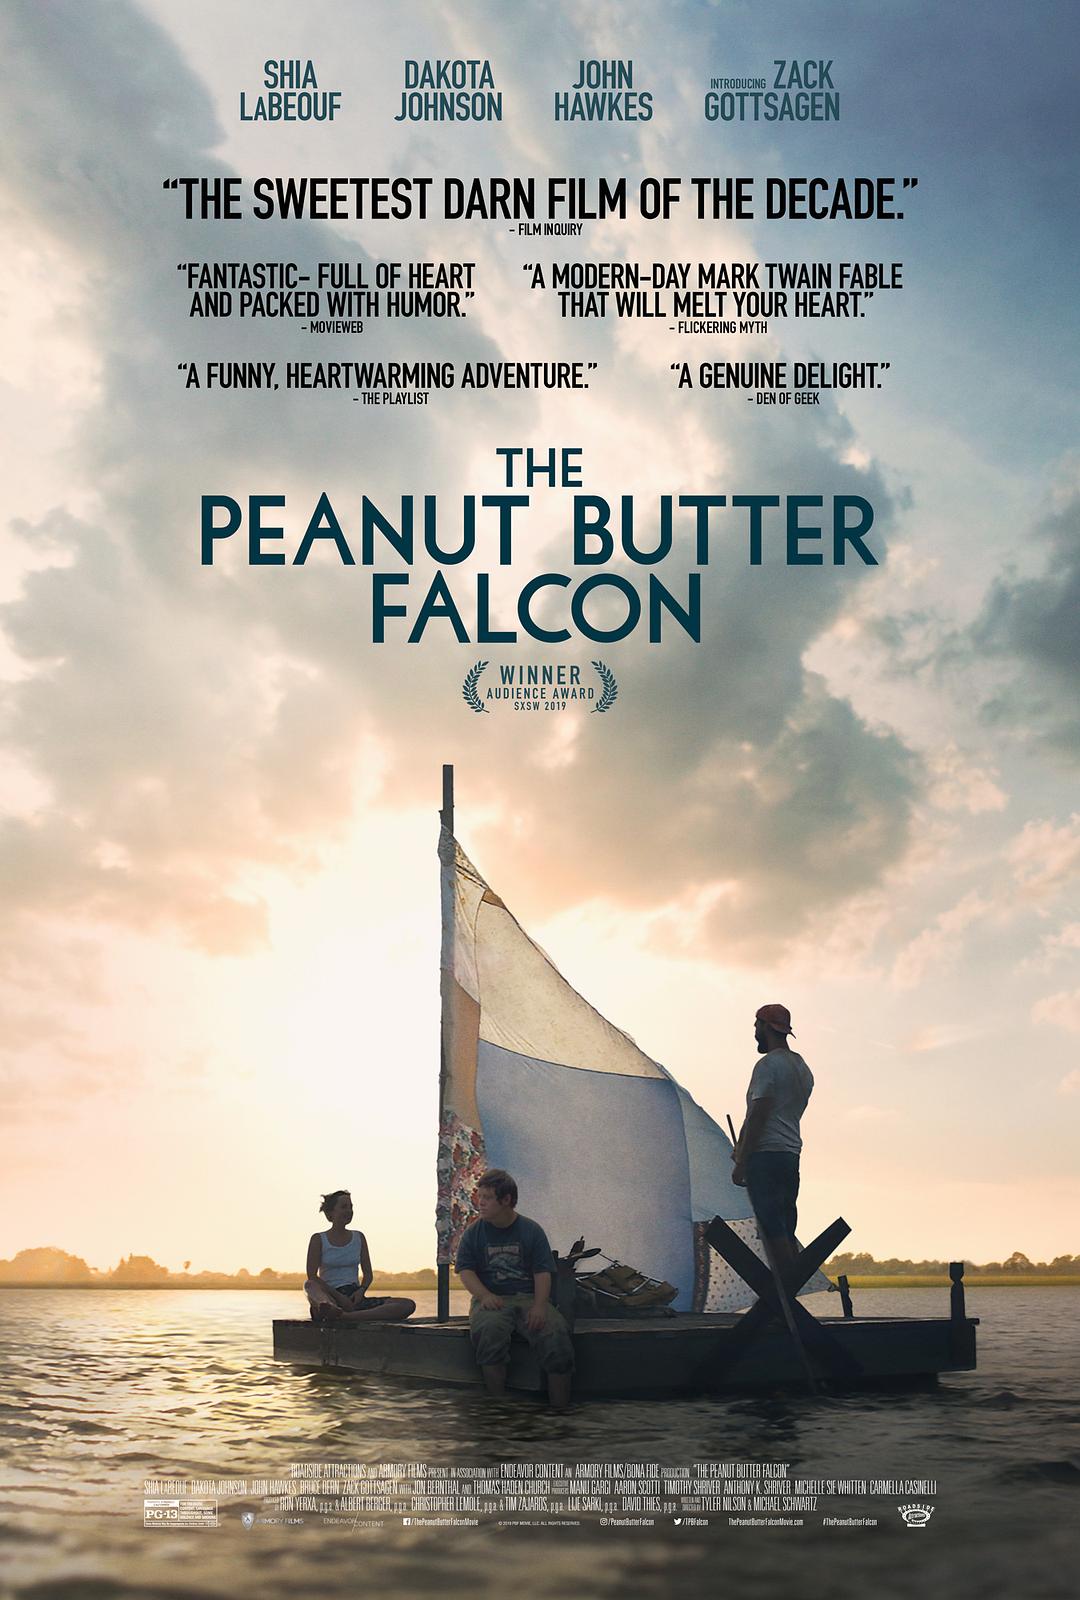 ӥ/ӥԸ The.Peanut.Butter.Falcon.2019.1080p.BluRay.x264-DRONES 7.66GB-1.png